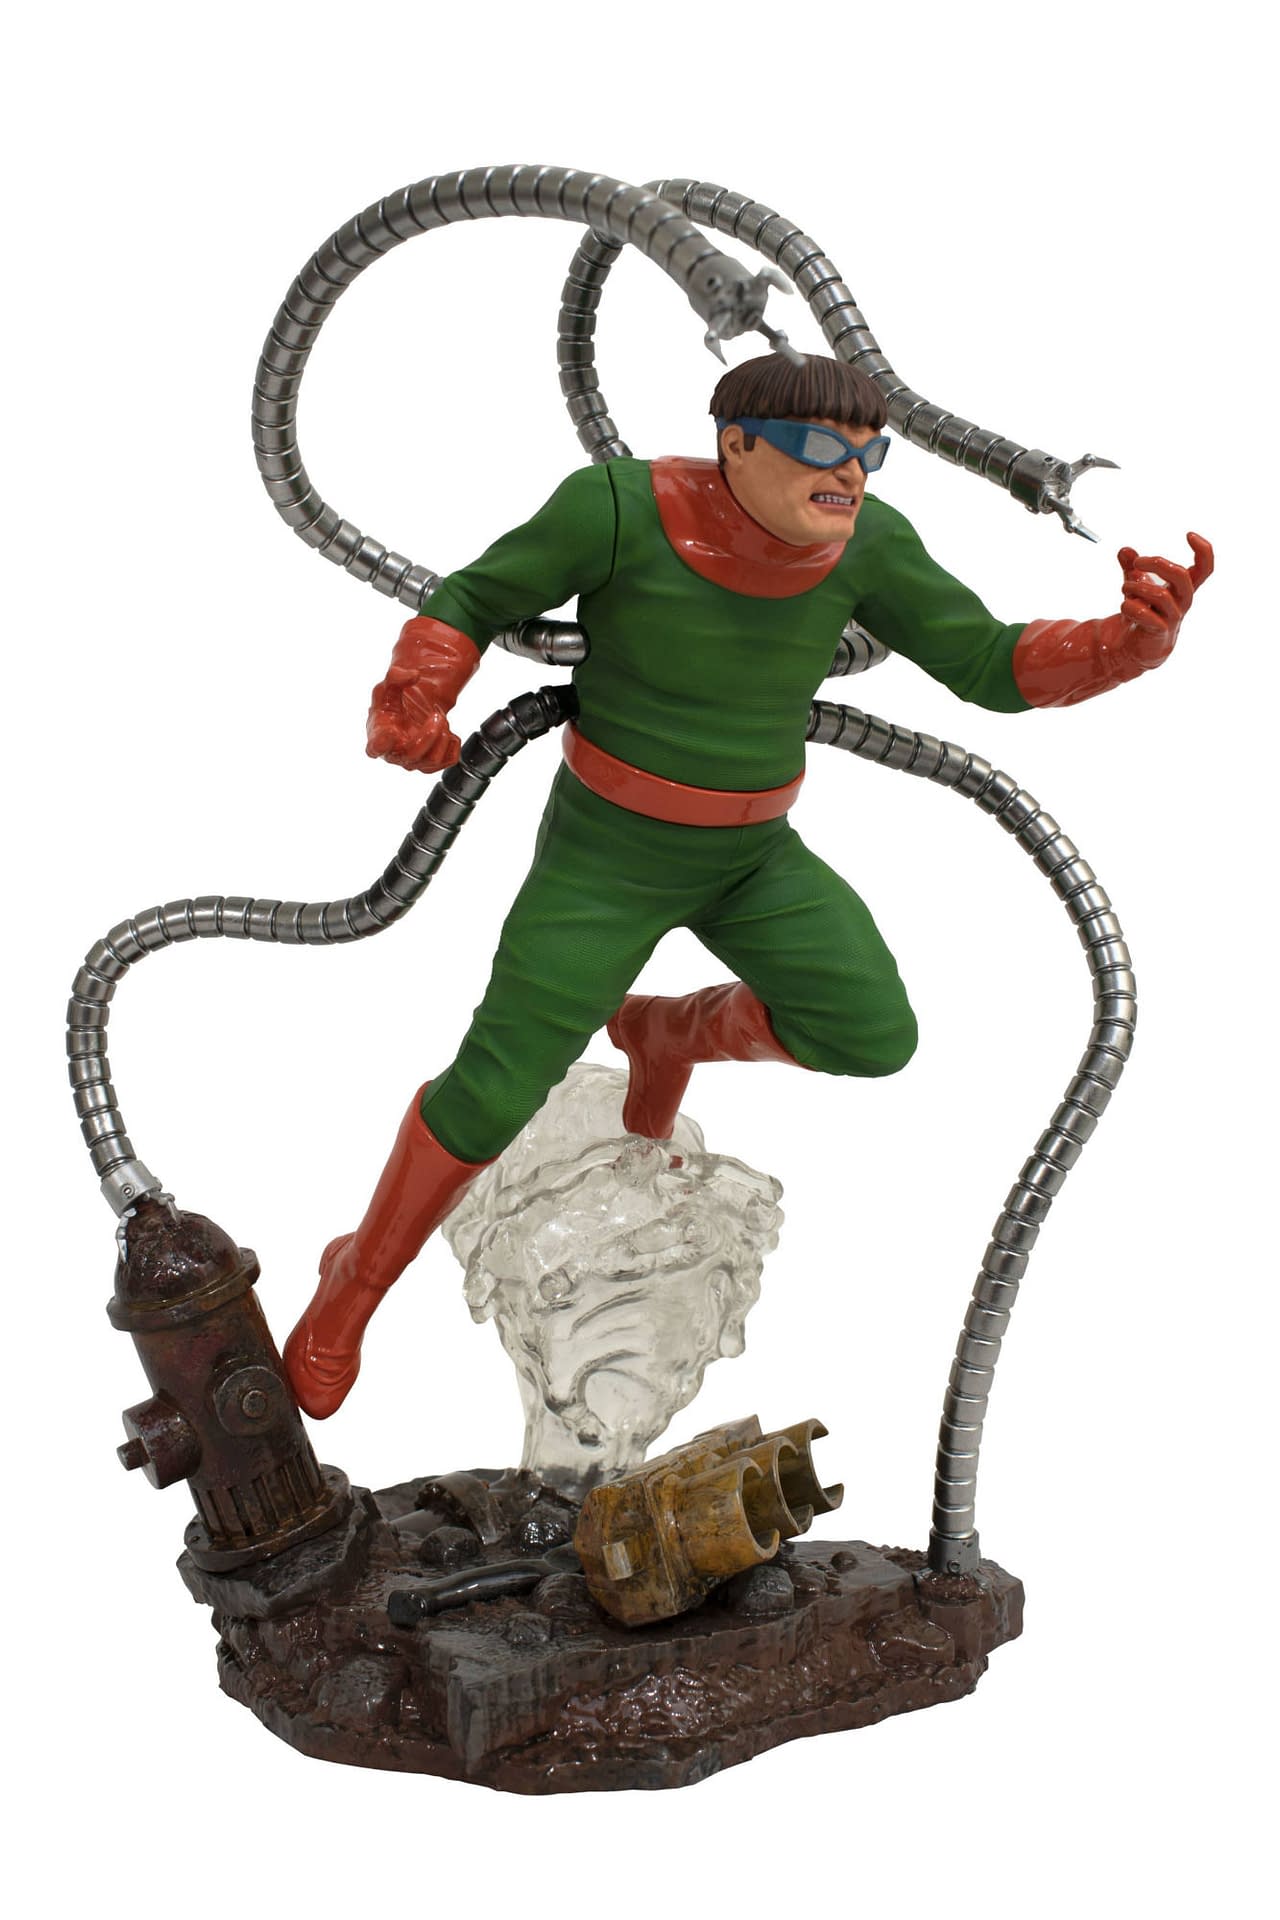 New Marvel Comics Statues Arrive from DST with Iron Man and Doc Ock